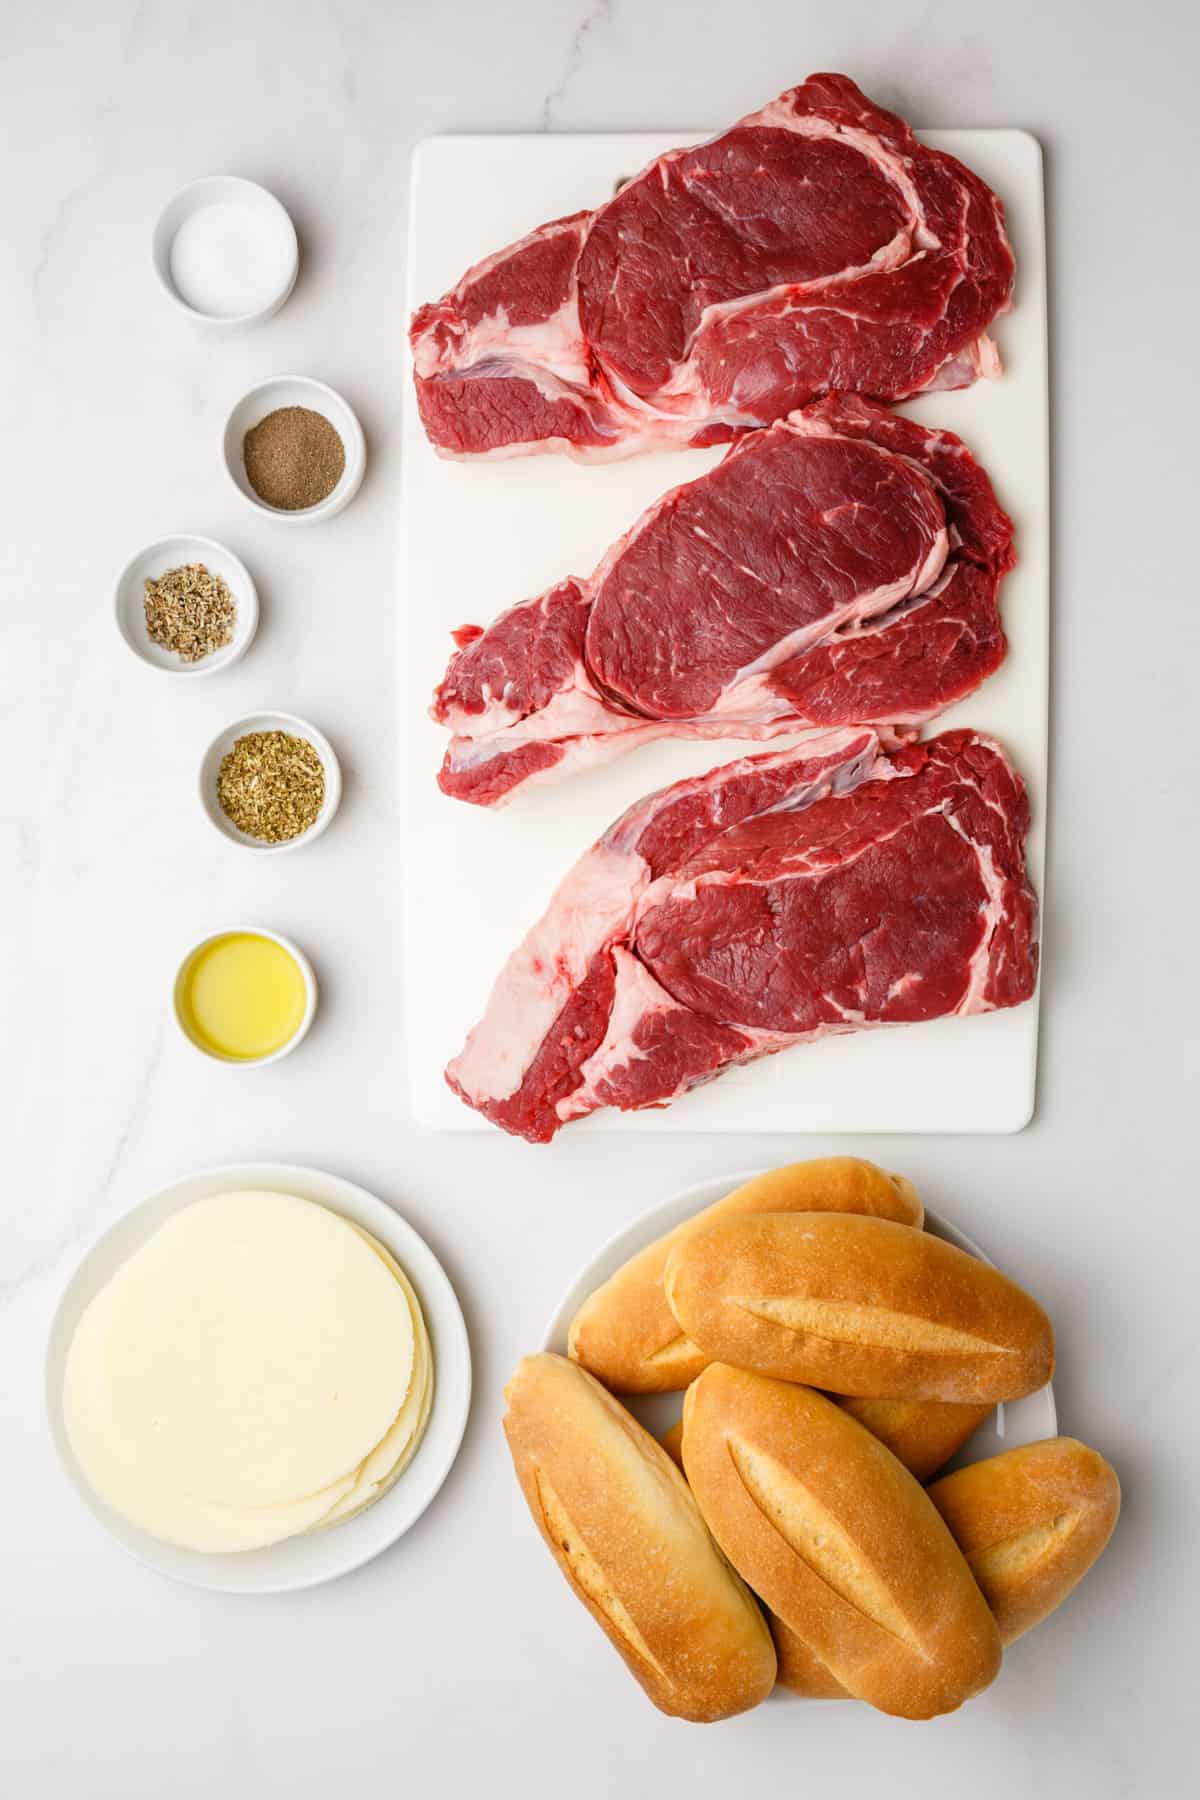 ingredients to make the french dip steak for sandwiches